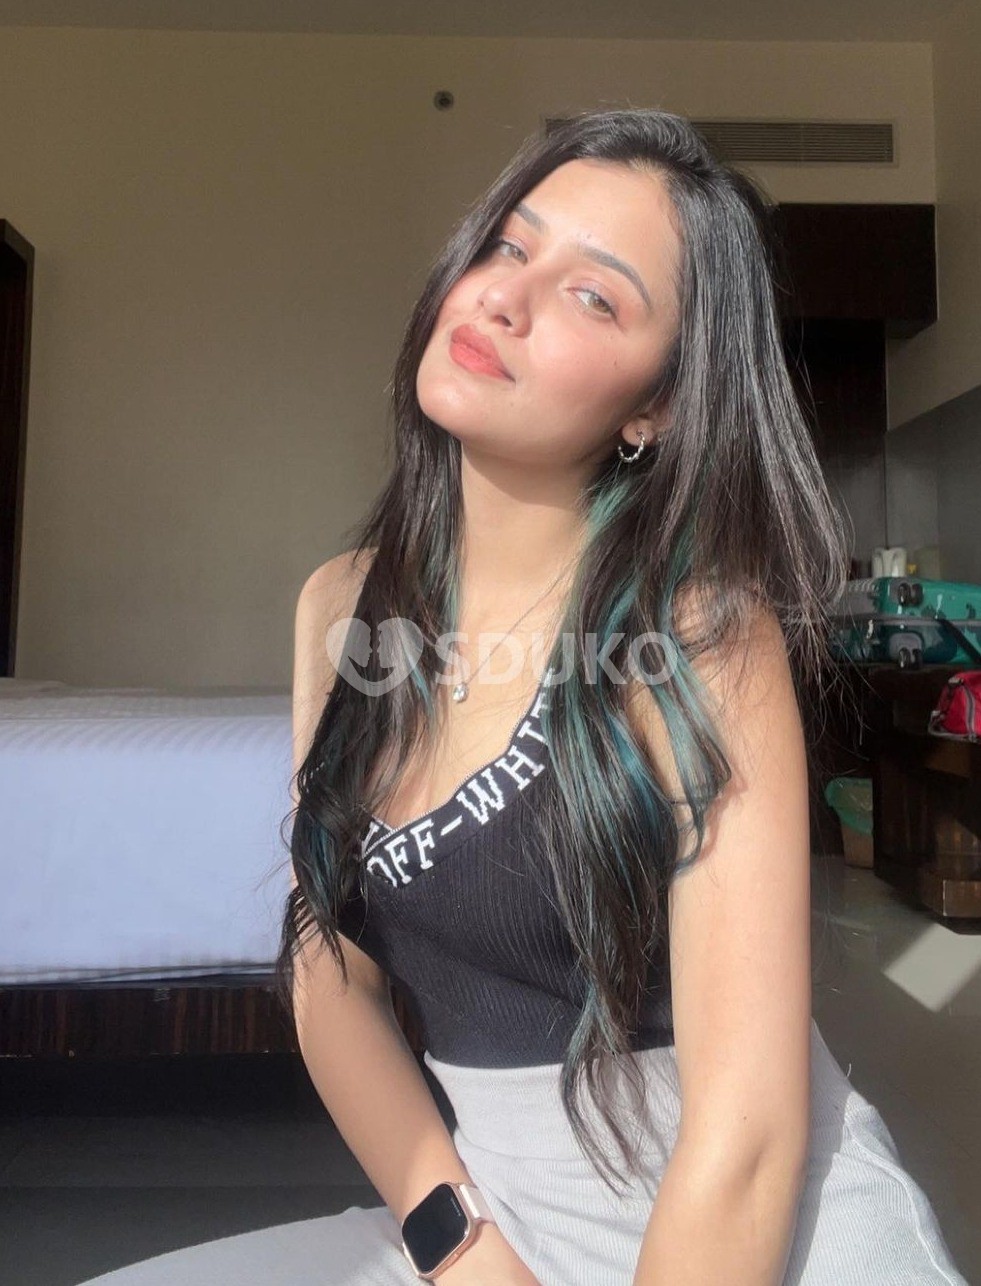 Jaipur ✅ 24x7 AFFORDABLE CHEAPEST RATE SAFE CALL GIRL SERVICE AVAILABLE OUTCALL AVAILABLEhd